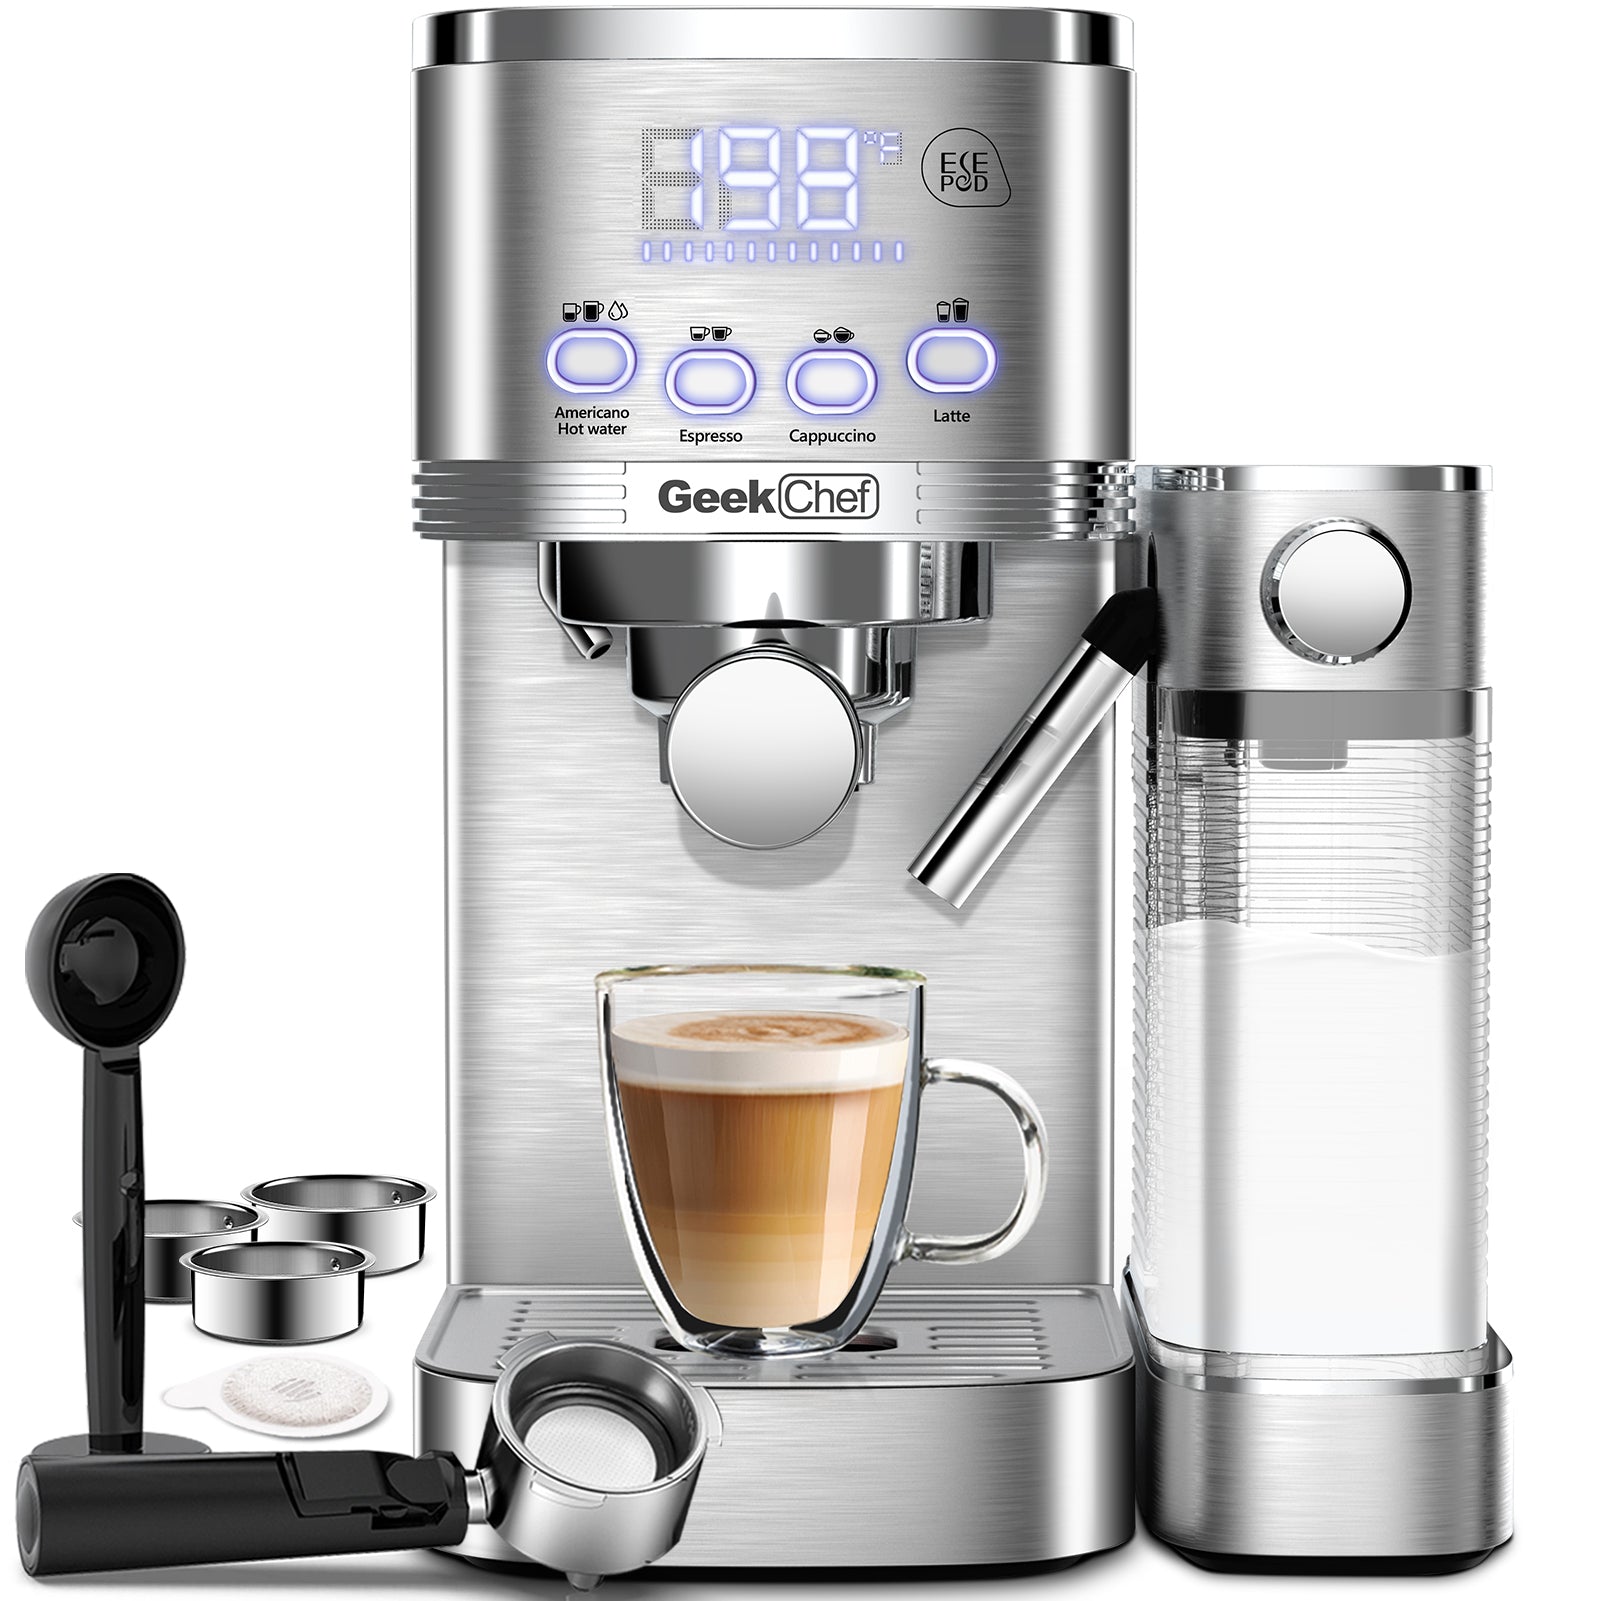 Geek-Chef-Espresso-and-Cappuccino-Machine-with-Automatic-Milk-Frother,20Bar-Espresso-Maker-for-Home,-for-Cappuccino-or-Latte,with-ESE-POD-filter,-Stainless-Steel,-Gift-for-Coffee-Lover-Ban-on-Amazon-kitchen-appliance